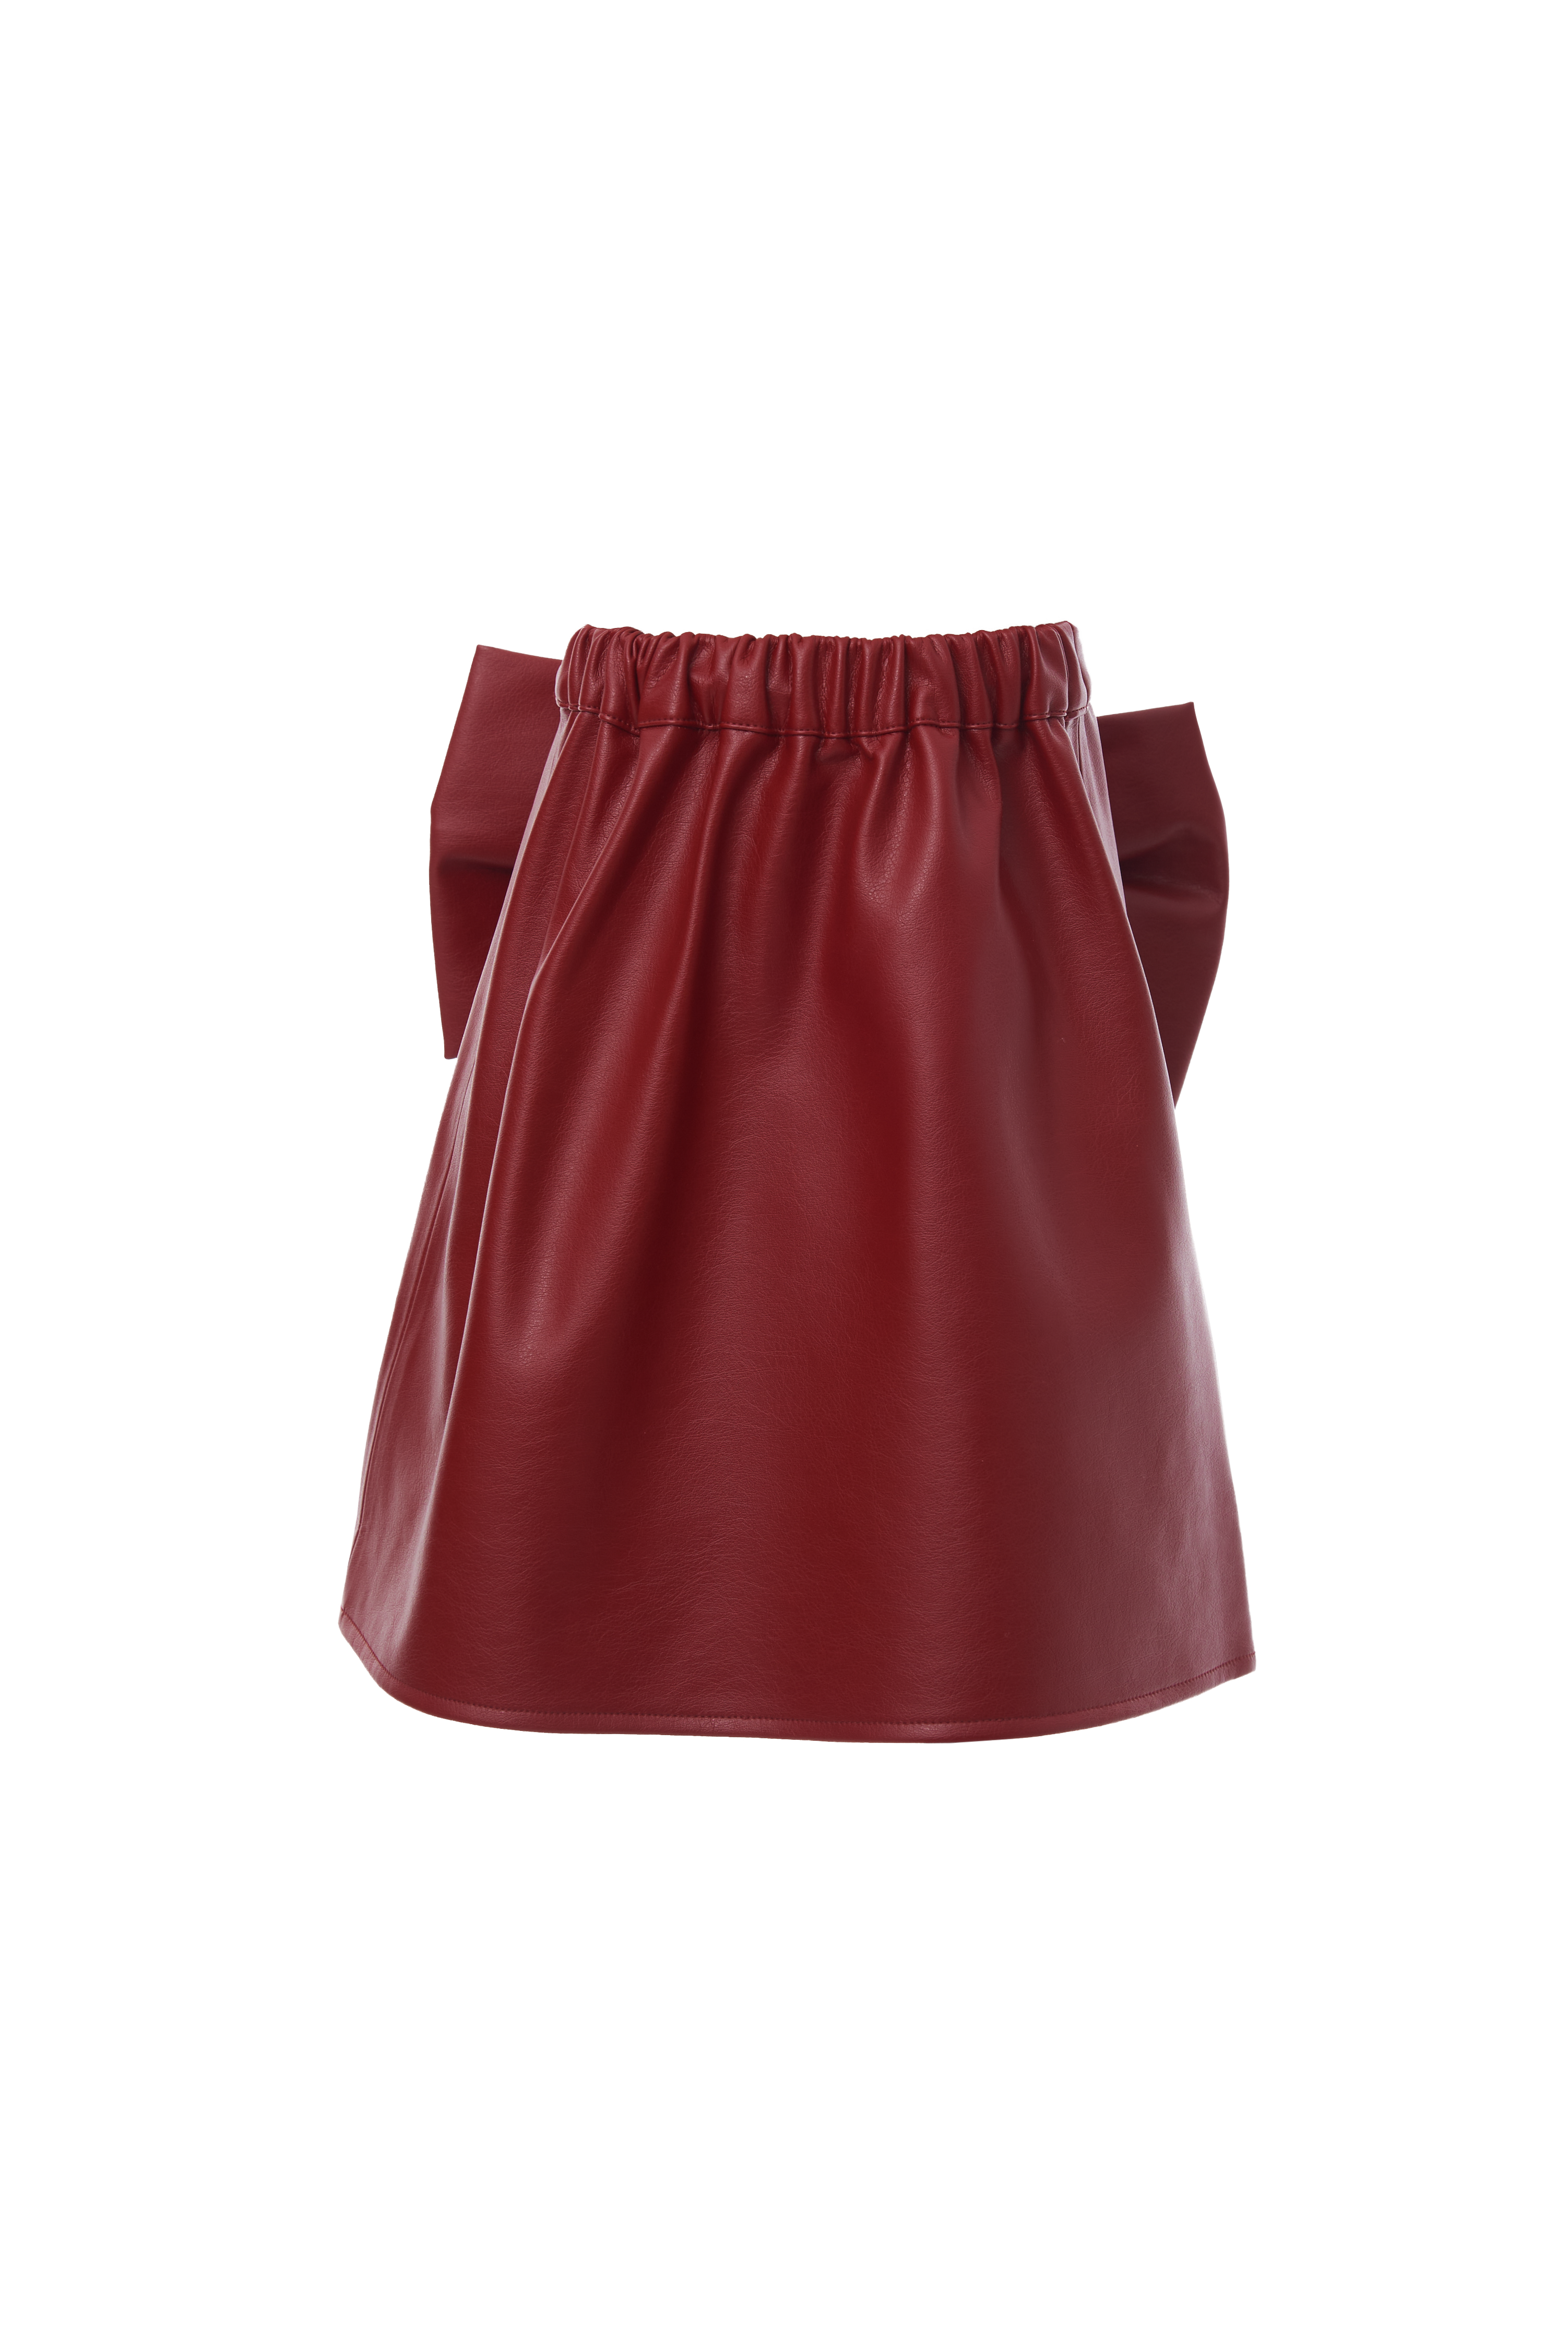 Leather Bow Skirt in Dark Red